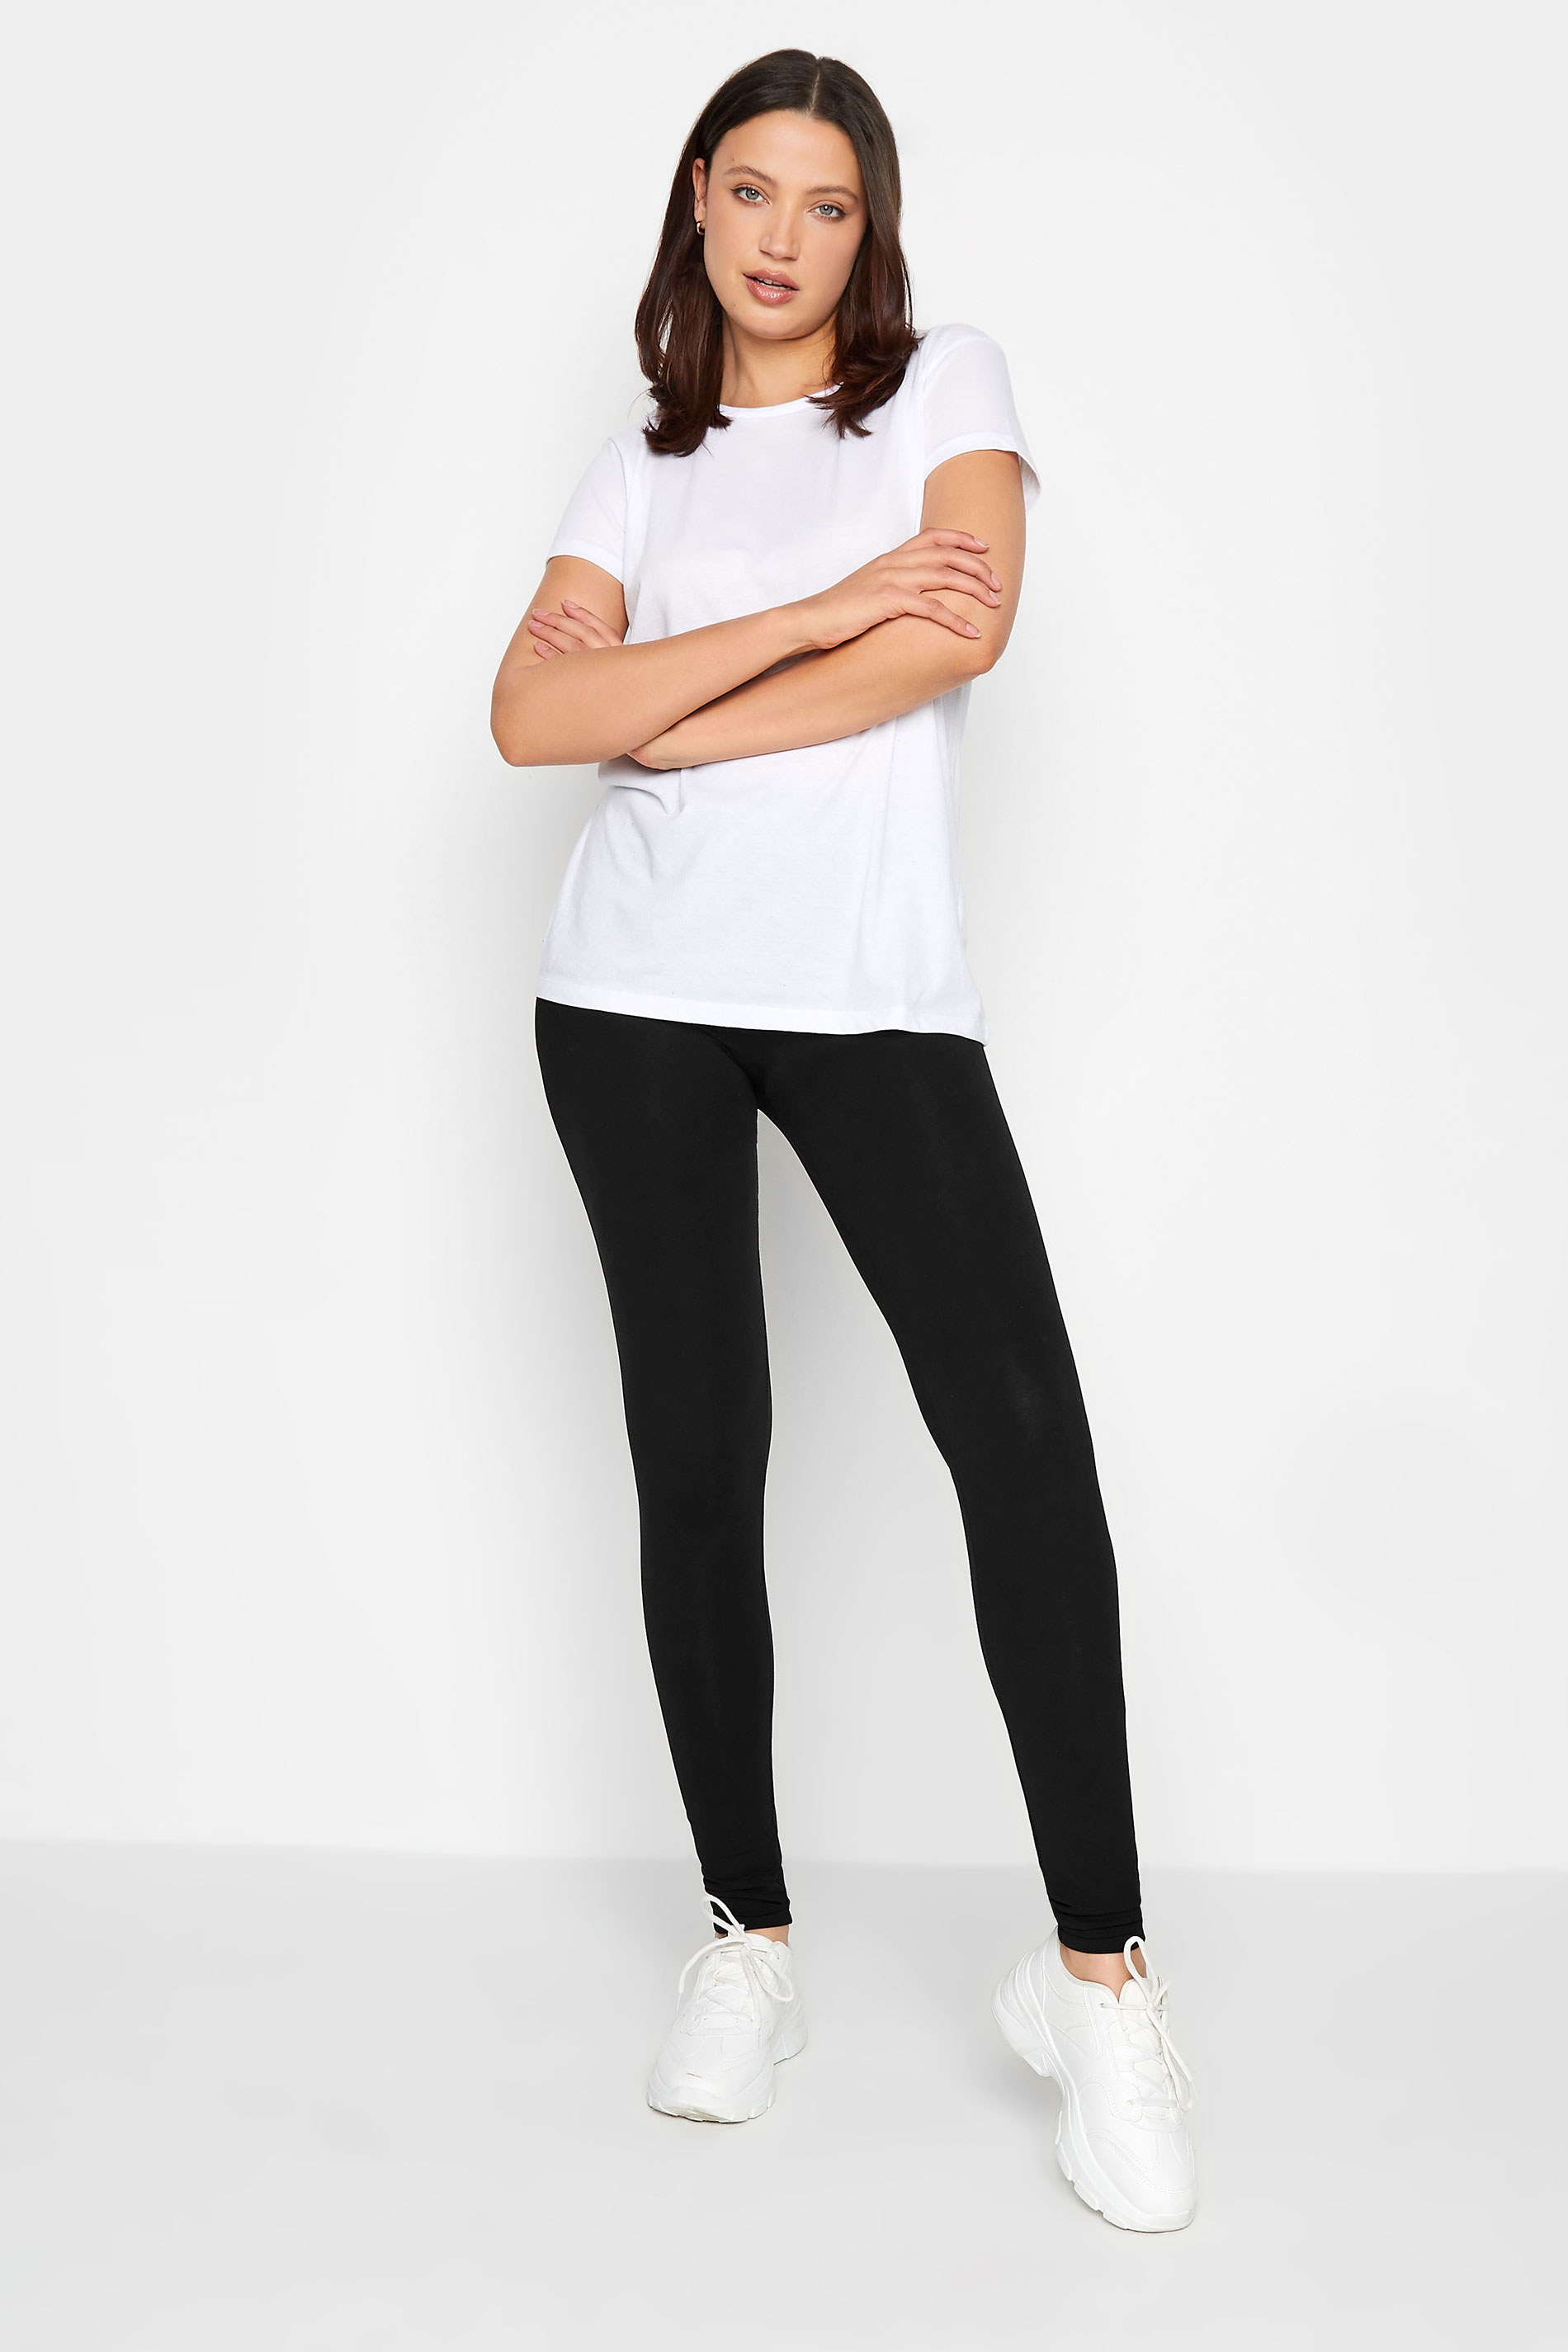 LTS MADE FOR GOOD 2 PACK Black Cotton Leggings | Long Tall Sally  3